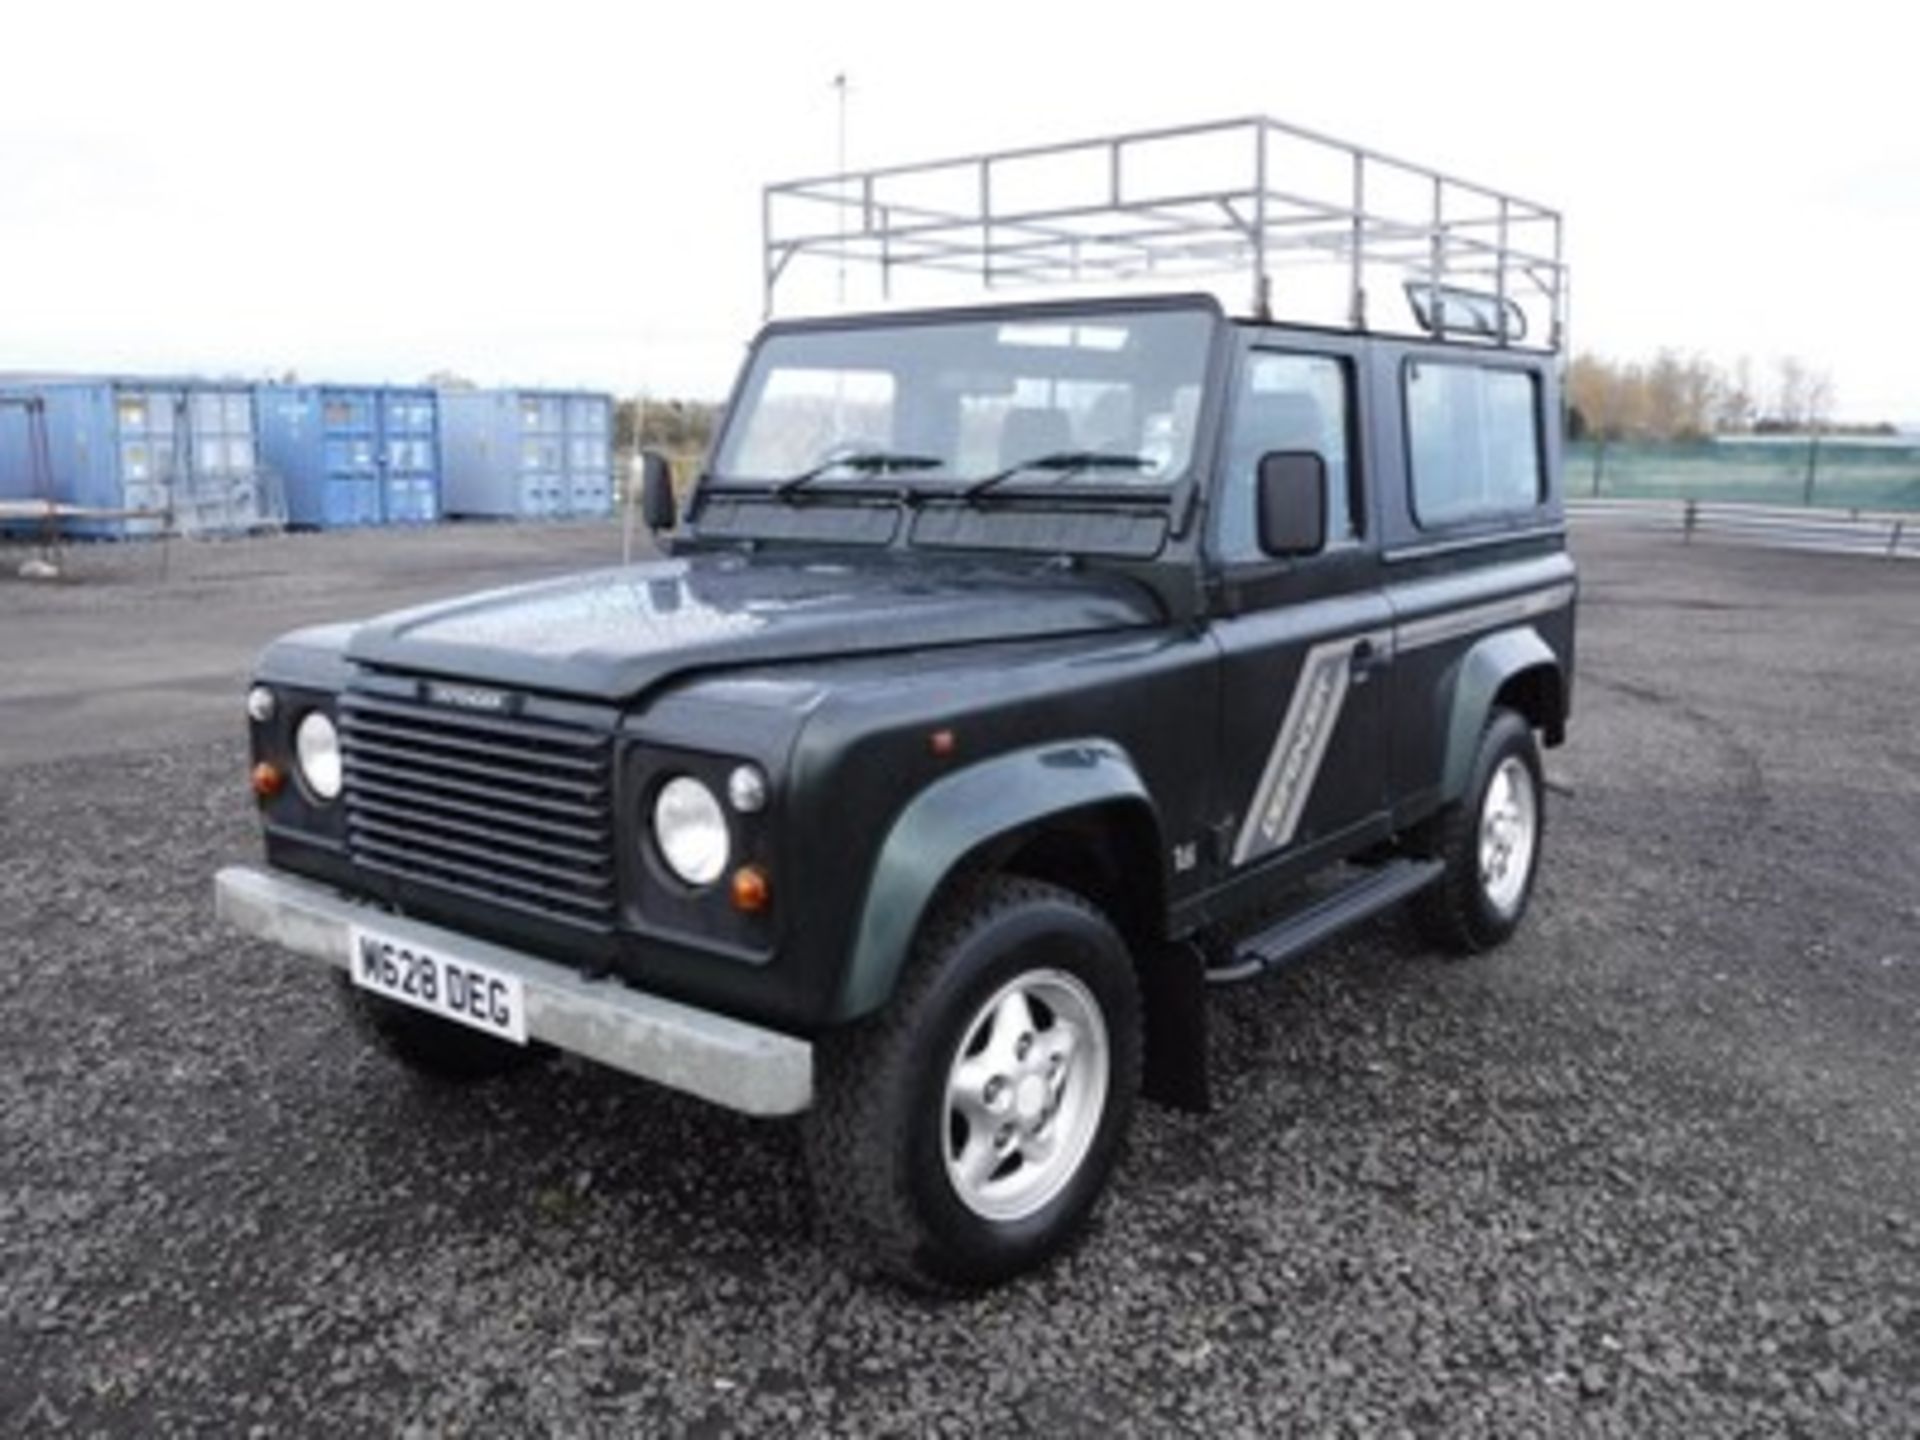 LAND ROVER 90 DEFENDER COUNTY SW TDI - 2495cc - Image 3 of 16